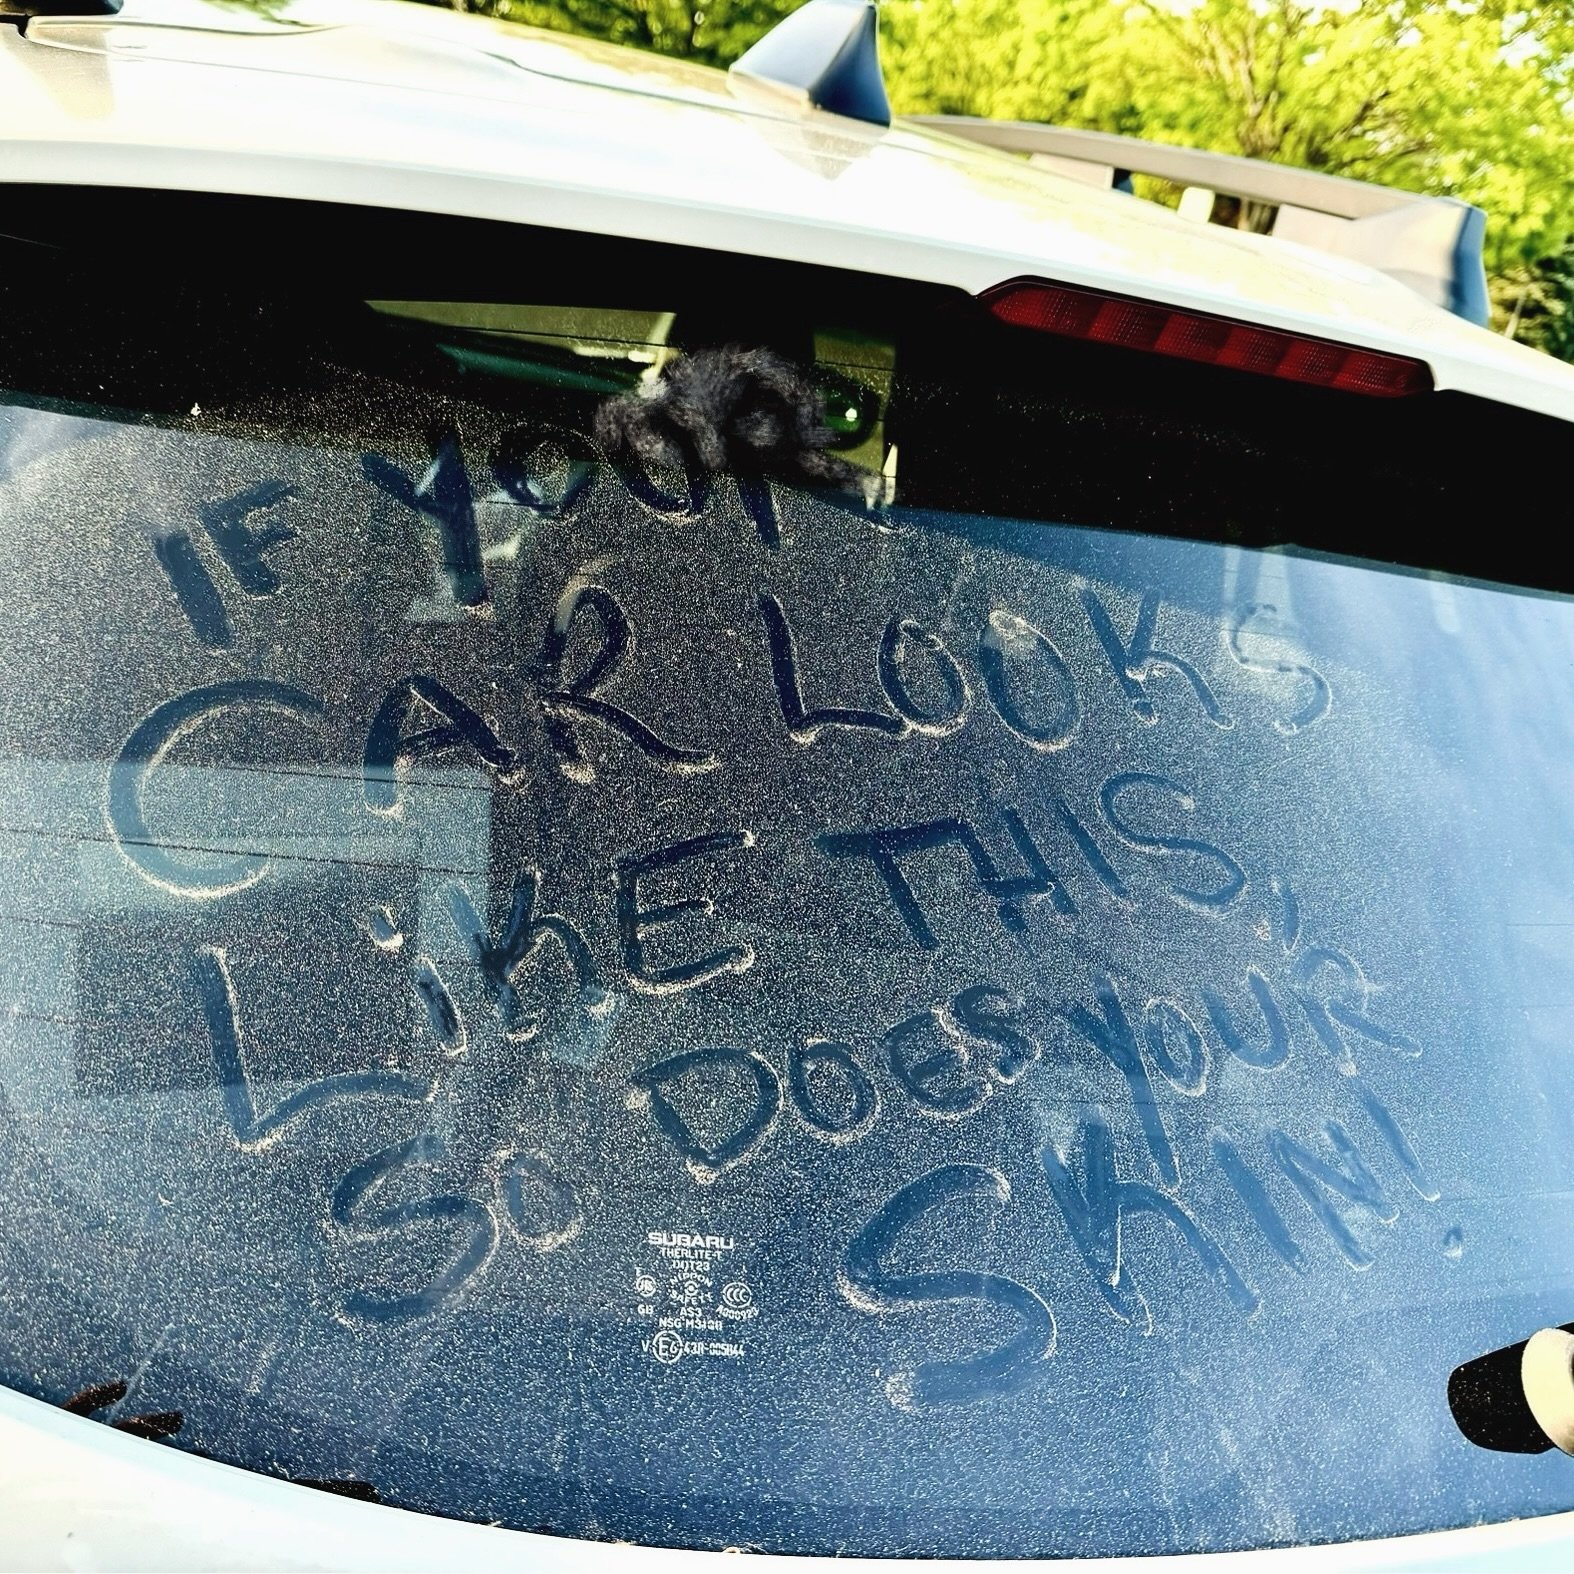 &ldquo;If your car looks like this, so does your skin!&rdquo;
Yes, writing that out triggered my allergies. 

One of many reasons why we need facials. The pollen and dirt isn&rsquo;t avoiding you just because you&rsquo;re not a car. 

Book online Jam